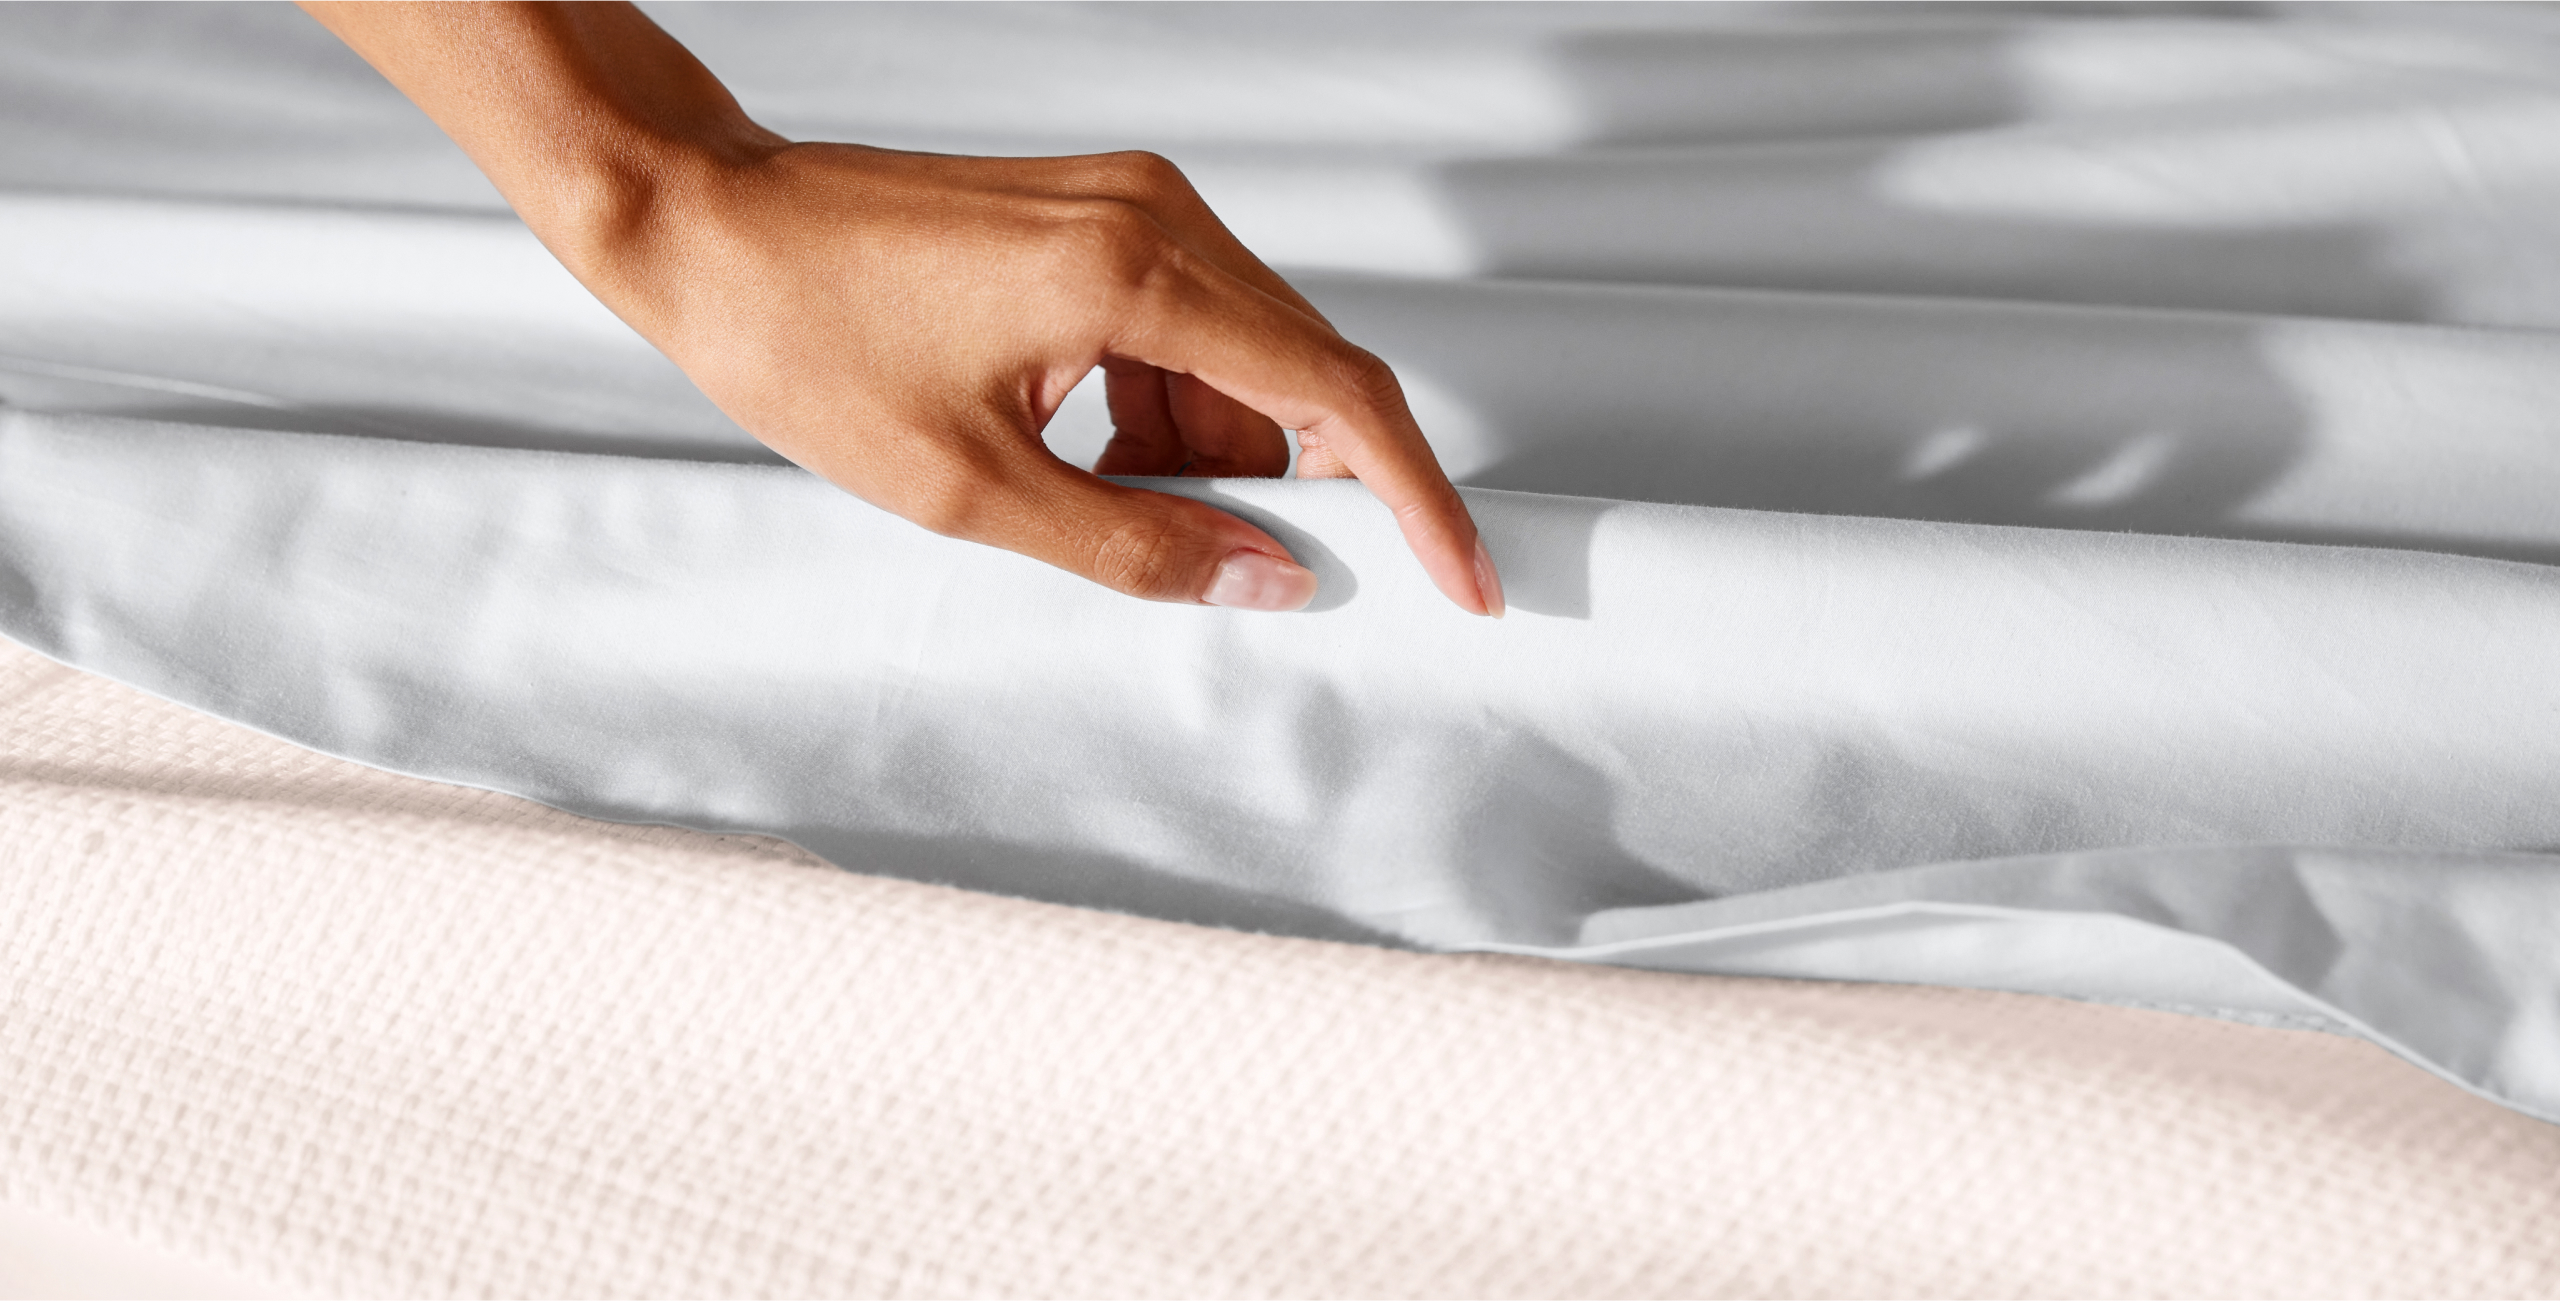 Oeko-Tex Certified Silk Sheets: How Safe Are They Made?